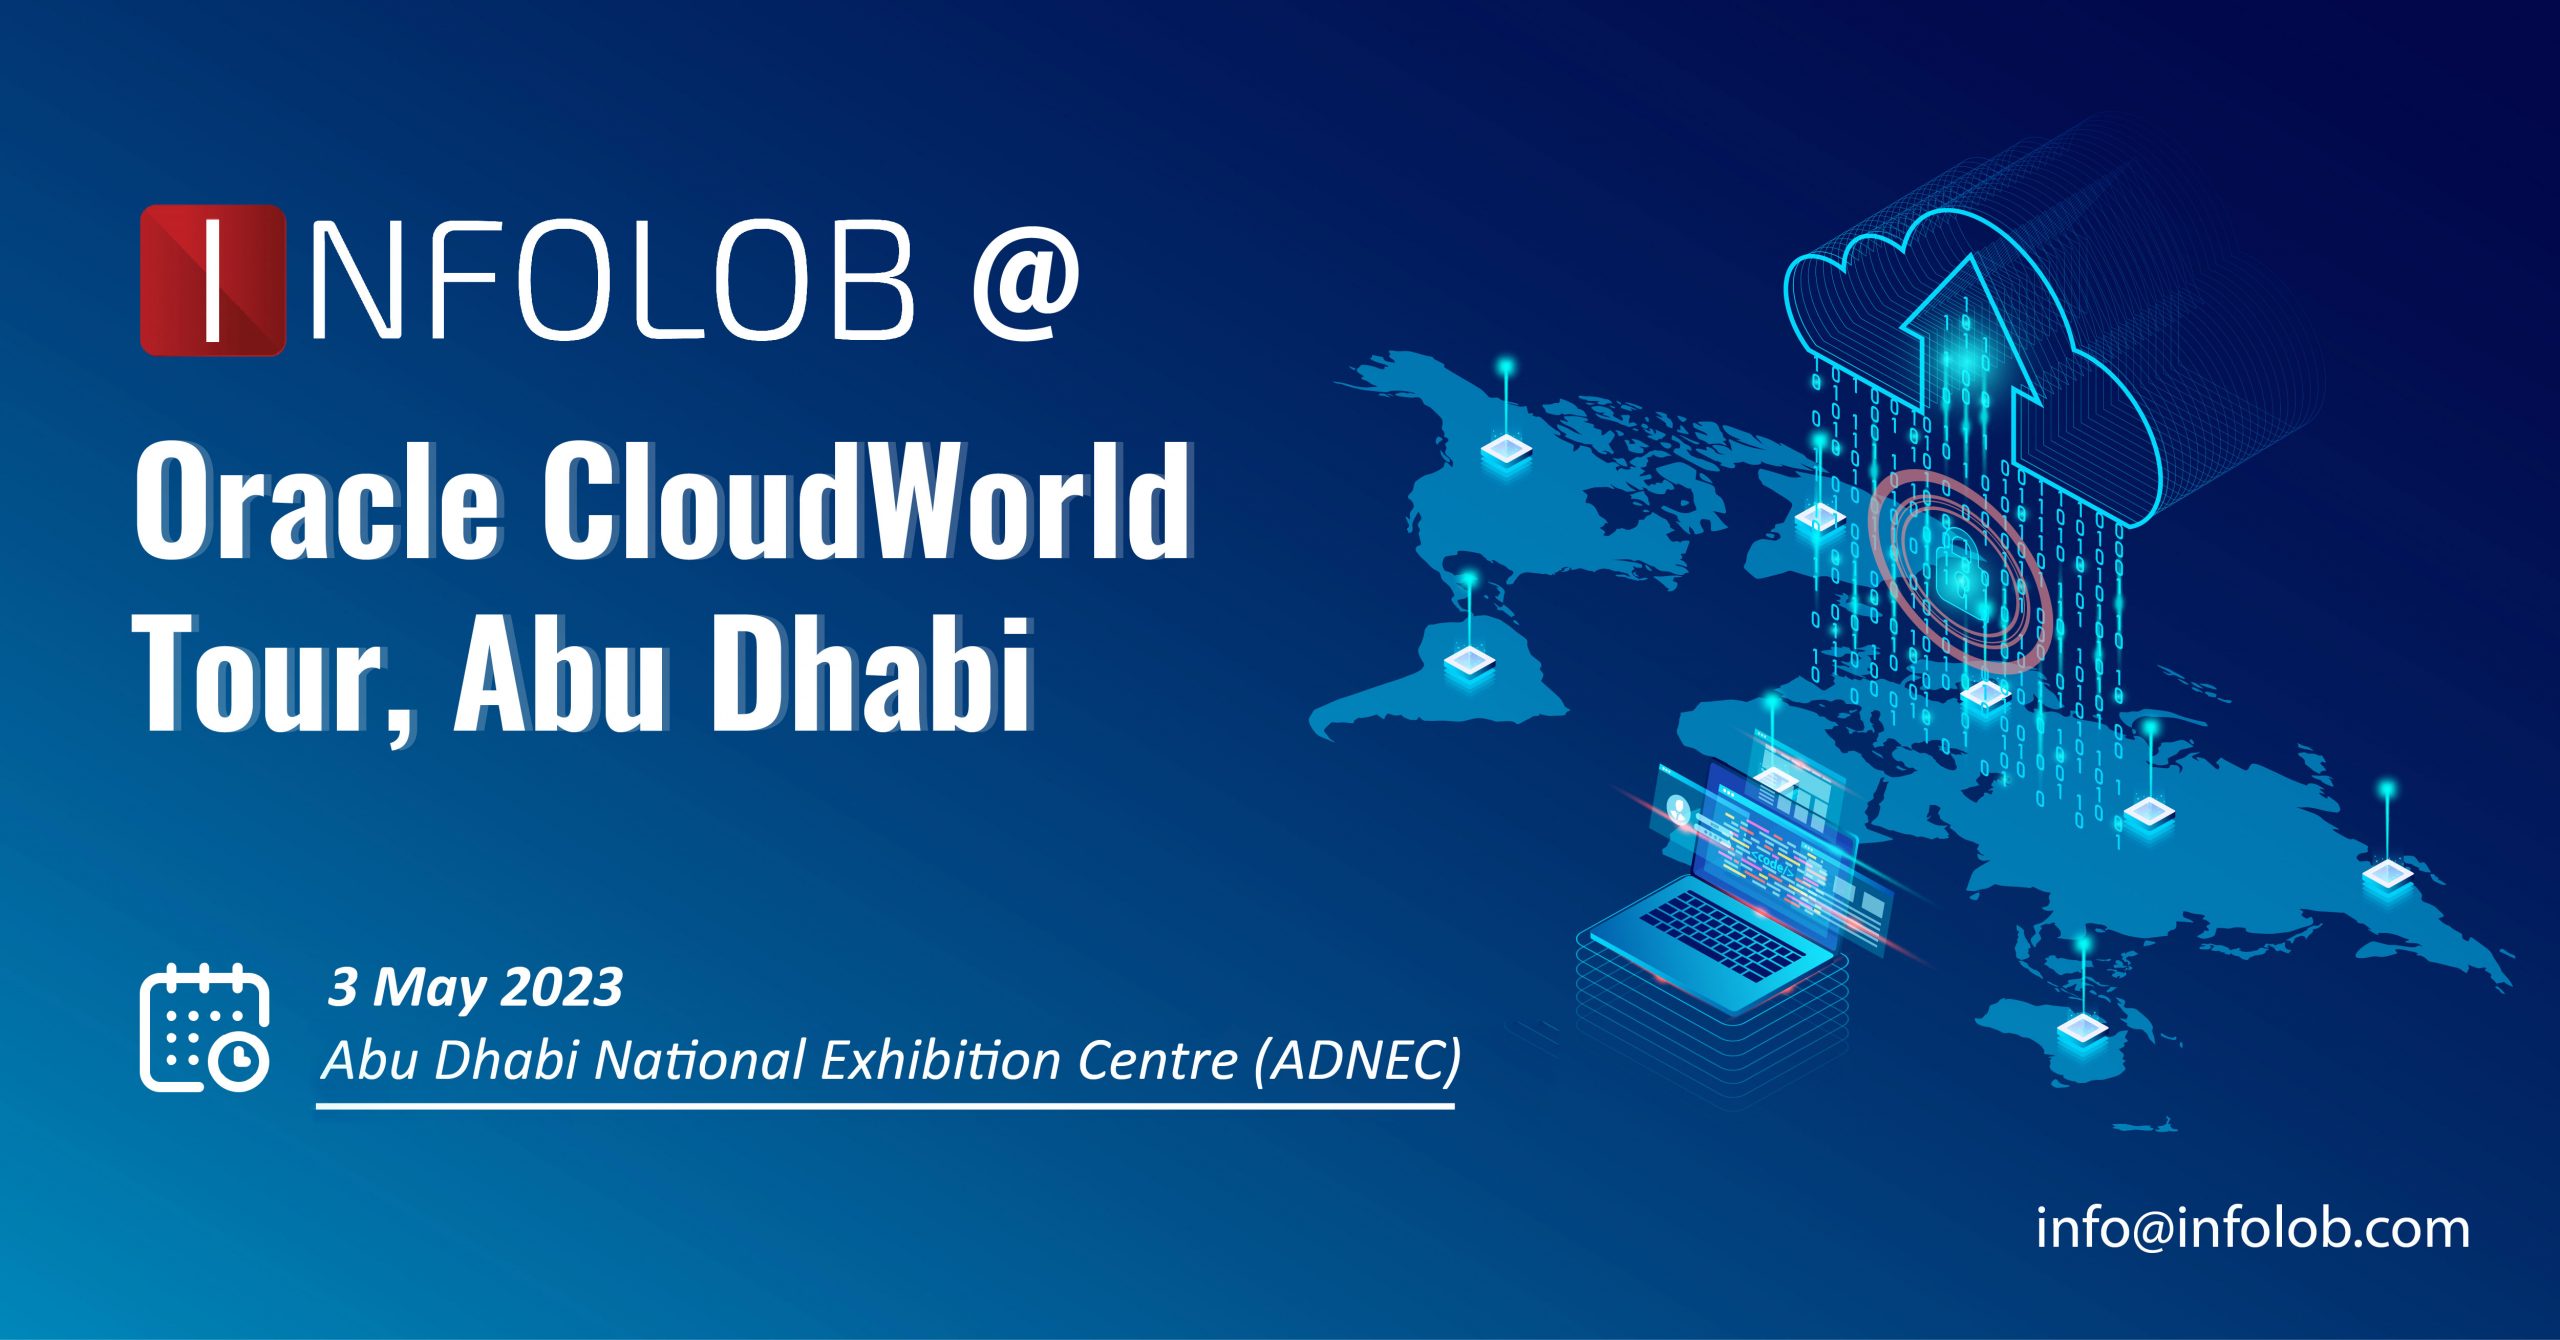 You are currently viewing INFOLOB @ Oracle CloudWorld Tour, Abu Dhabi